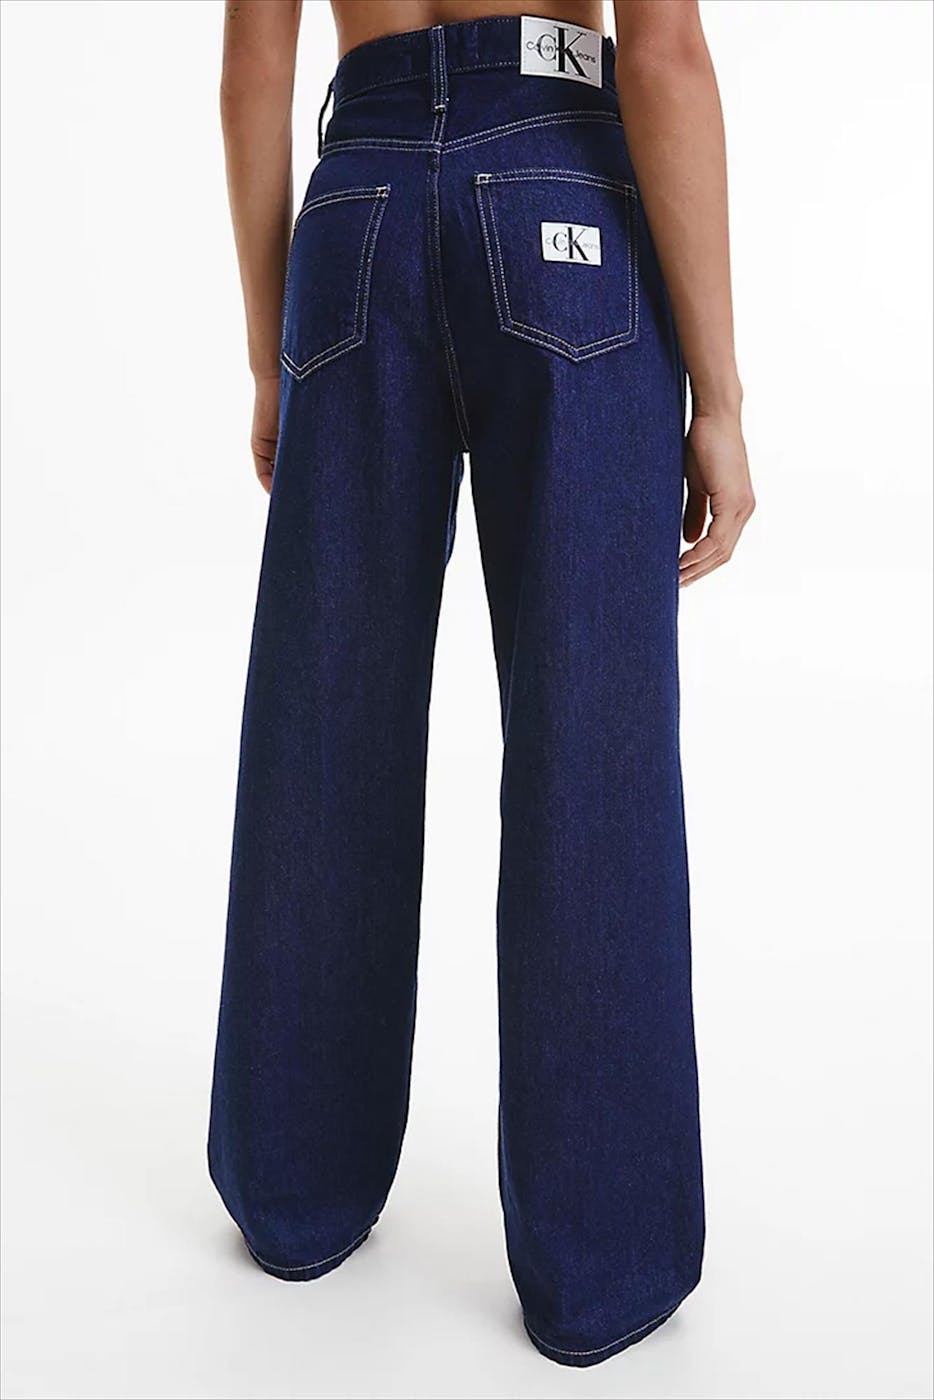 Calvin Klein Jeans - Donkerblauwe high Rise Relaxed jeans